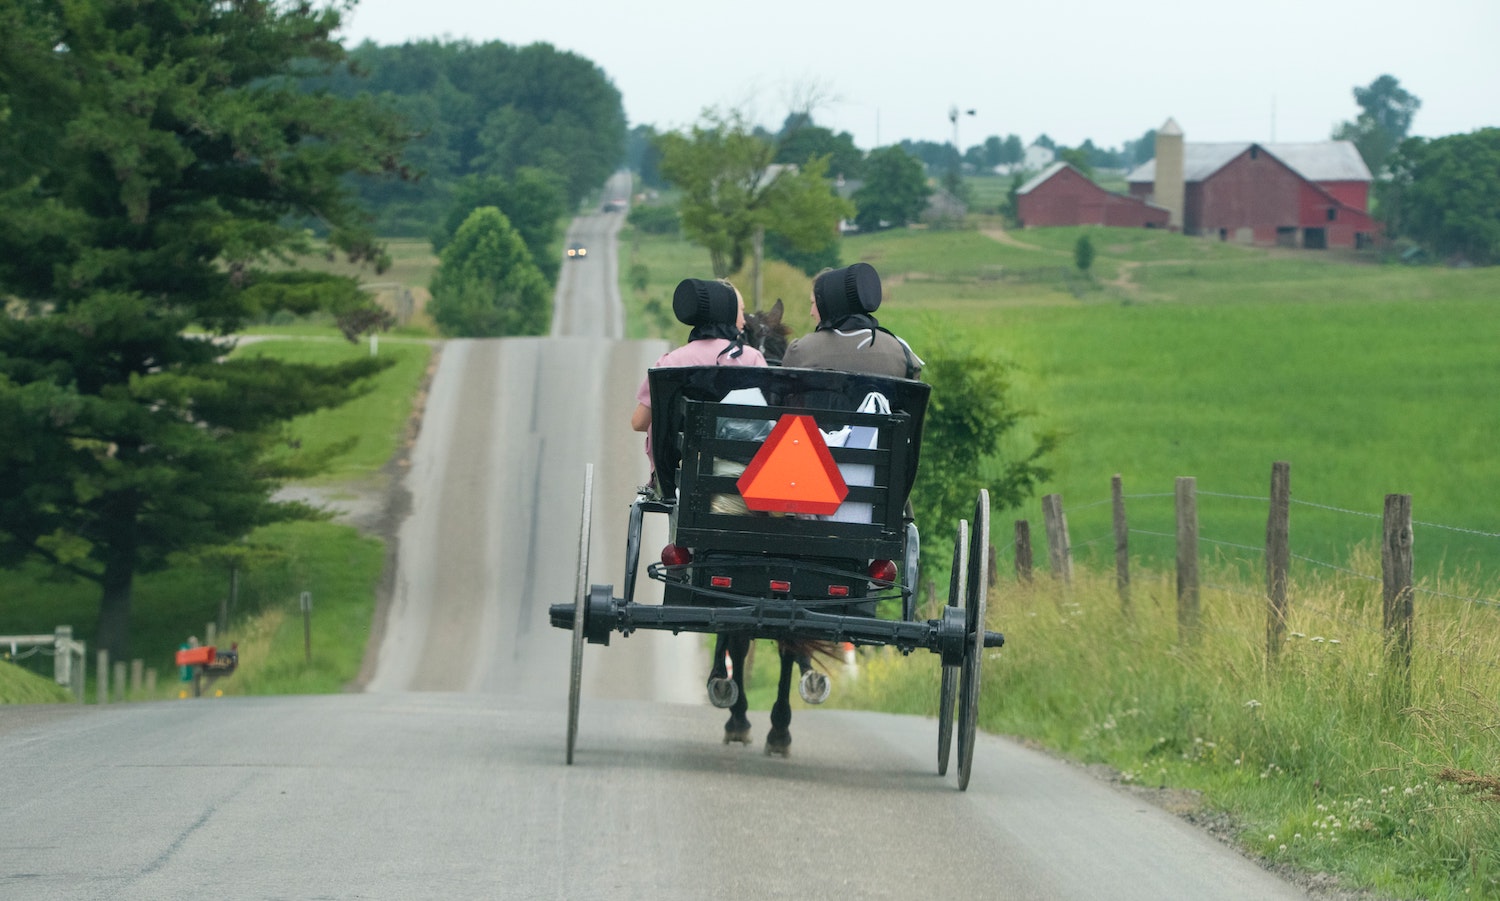 2 Amish women on a horse drawn buggy photographed from behind